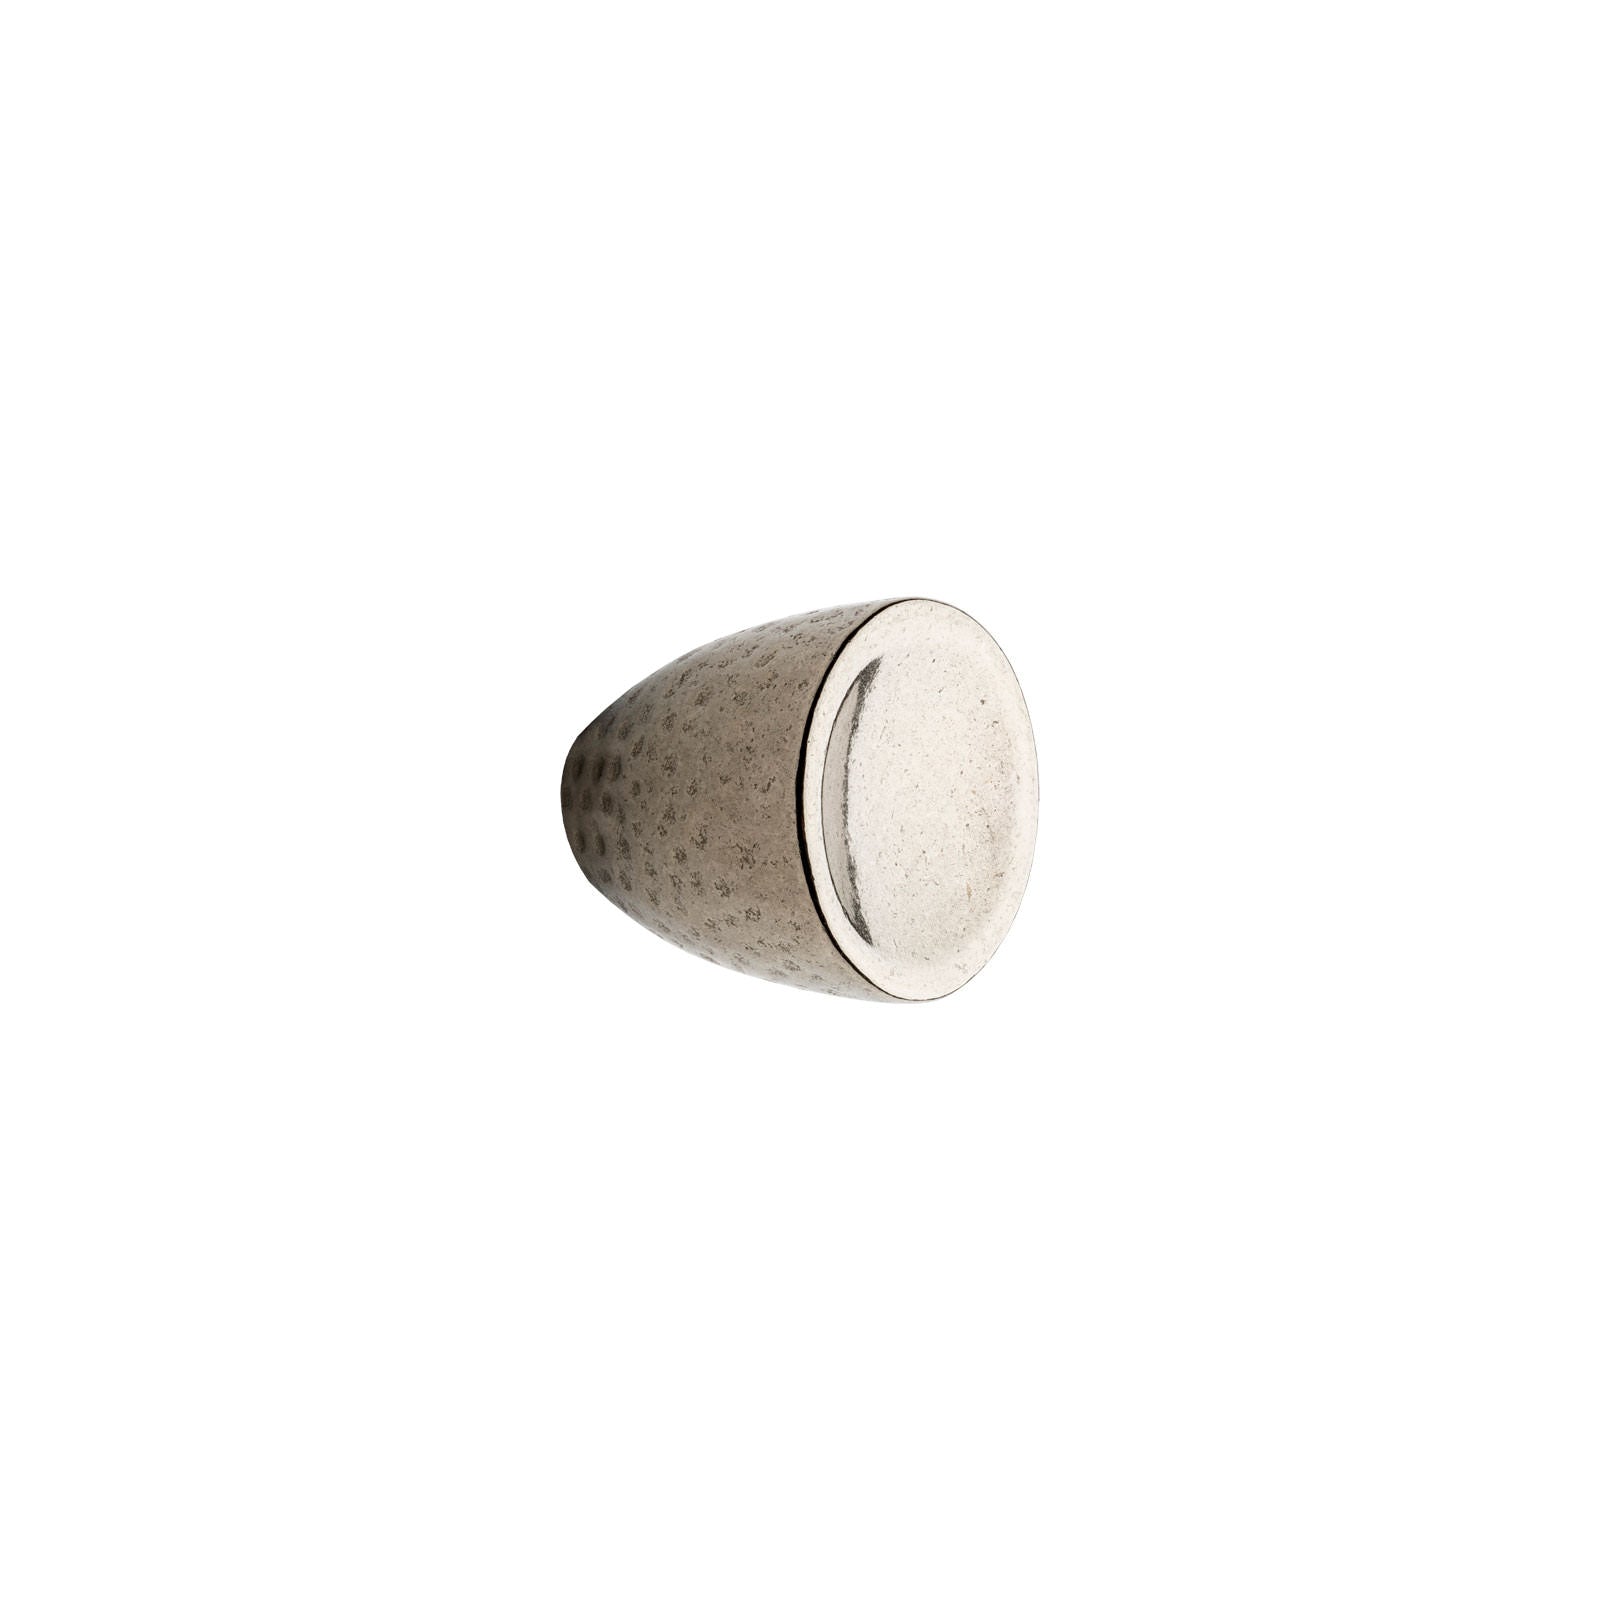 Rocky Mountain Hardware CK248 - 1 1/4" Cup Cabinet Knob